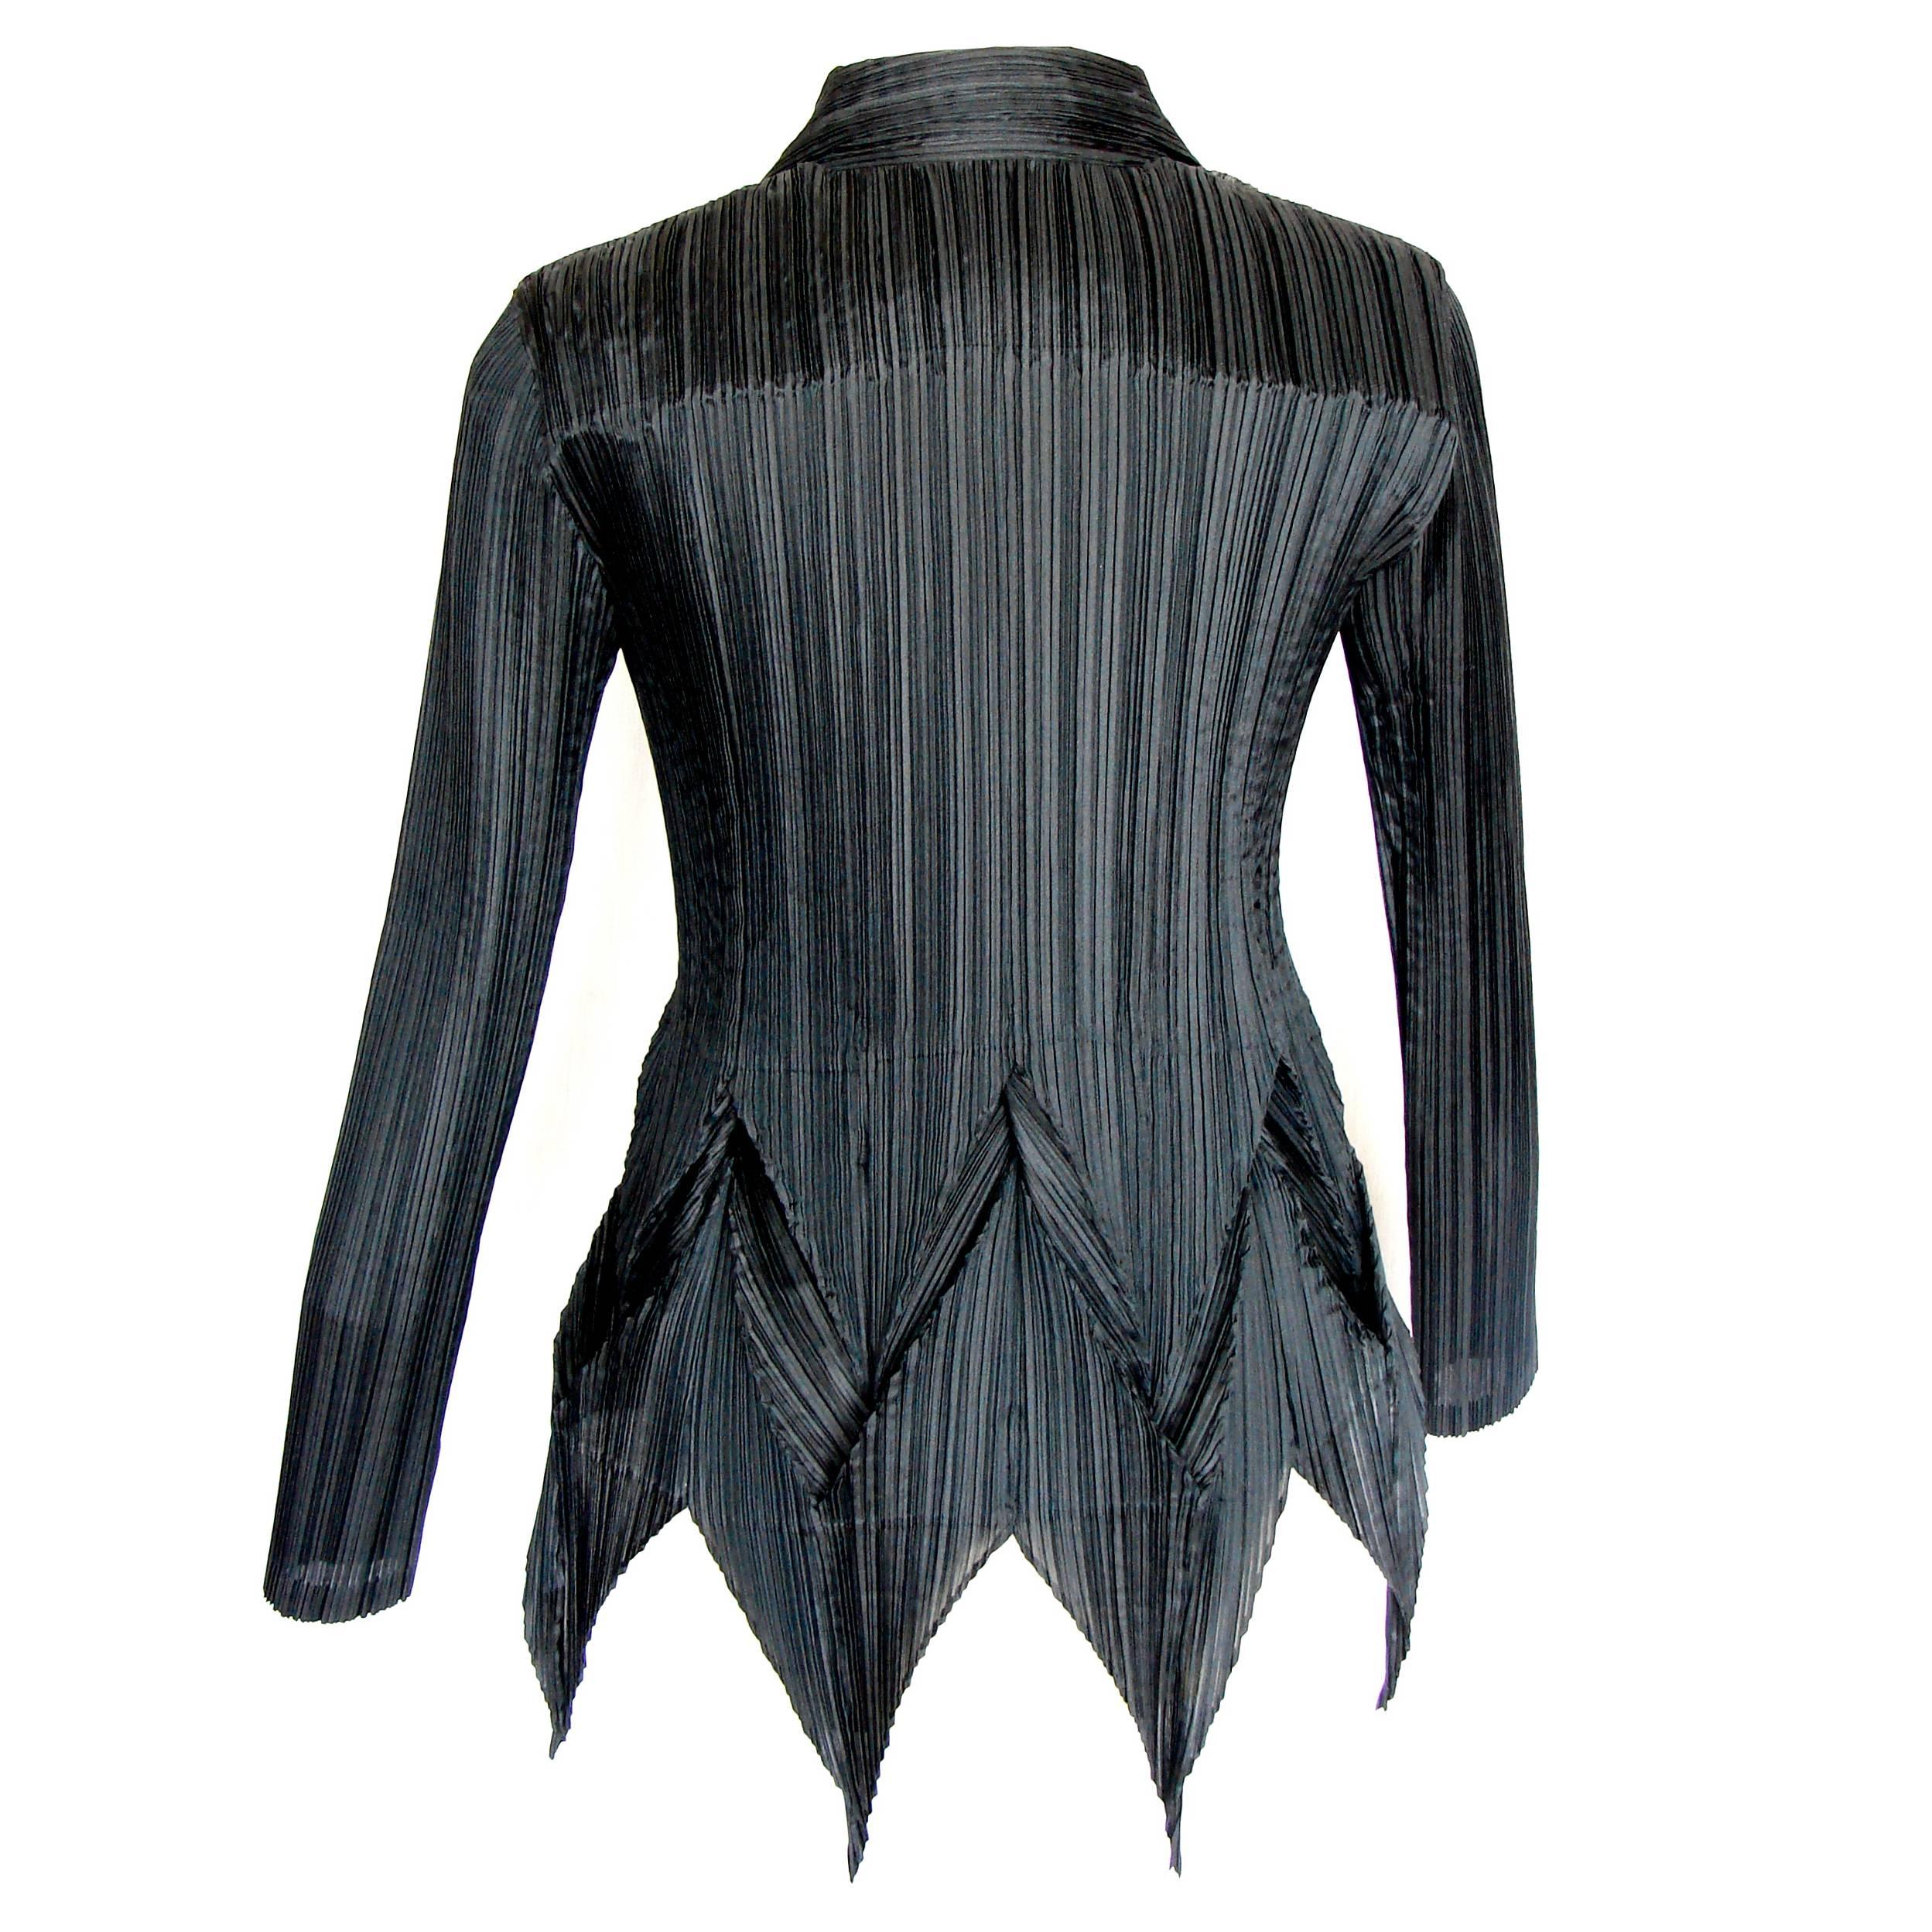 Issey Miyake Black Pleated Jacket with Pointed Tails Architectural Sz 3